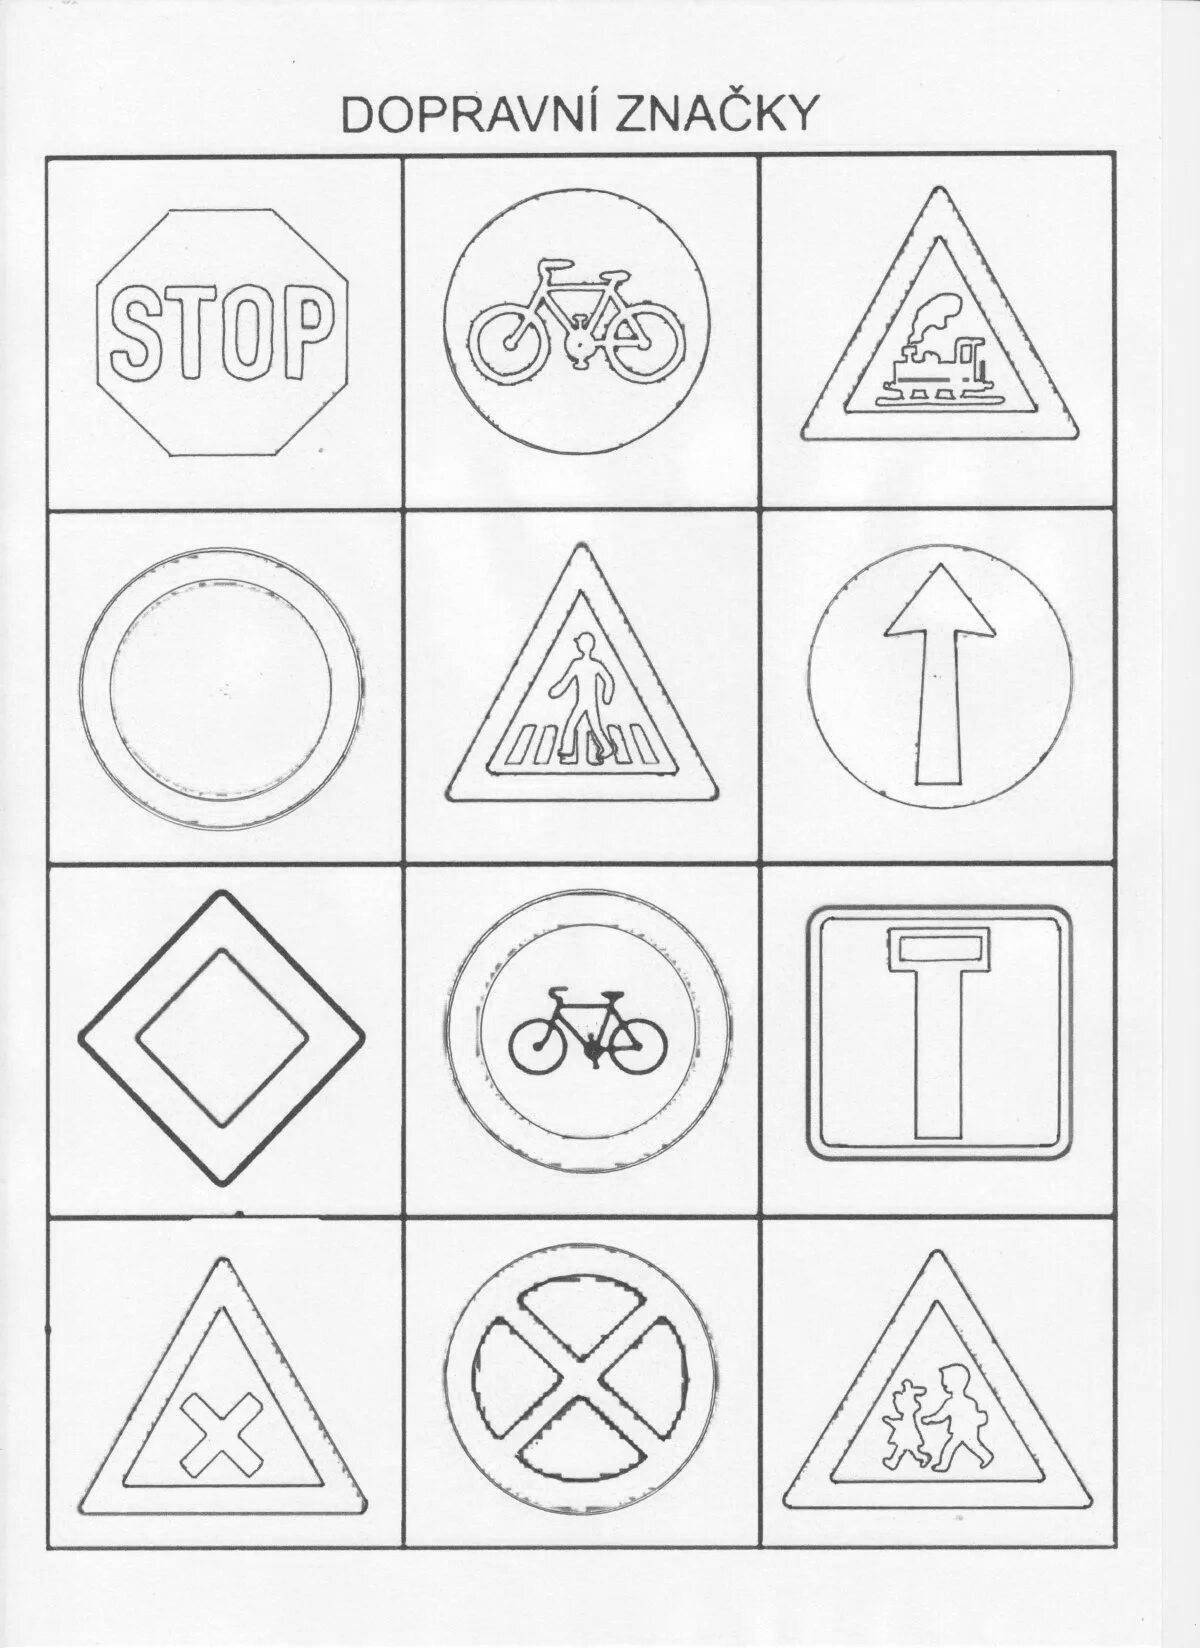 Colorful road signs coloring pages for schoolchildren